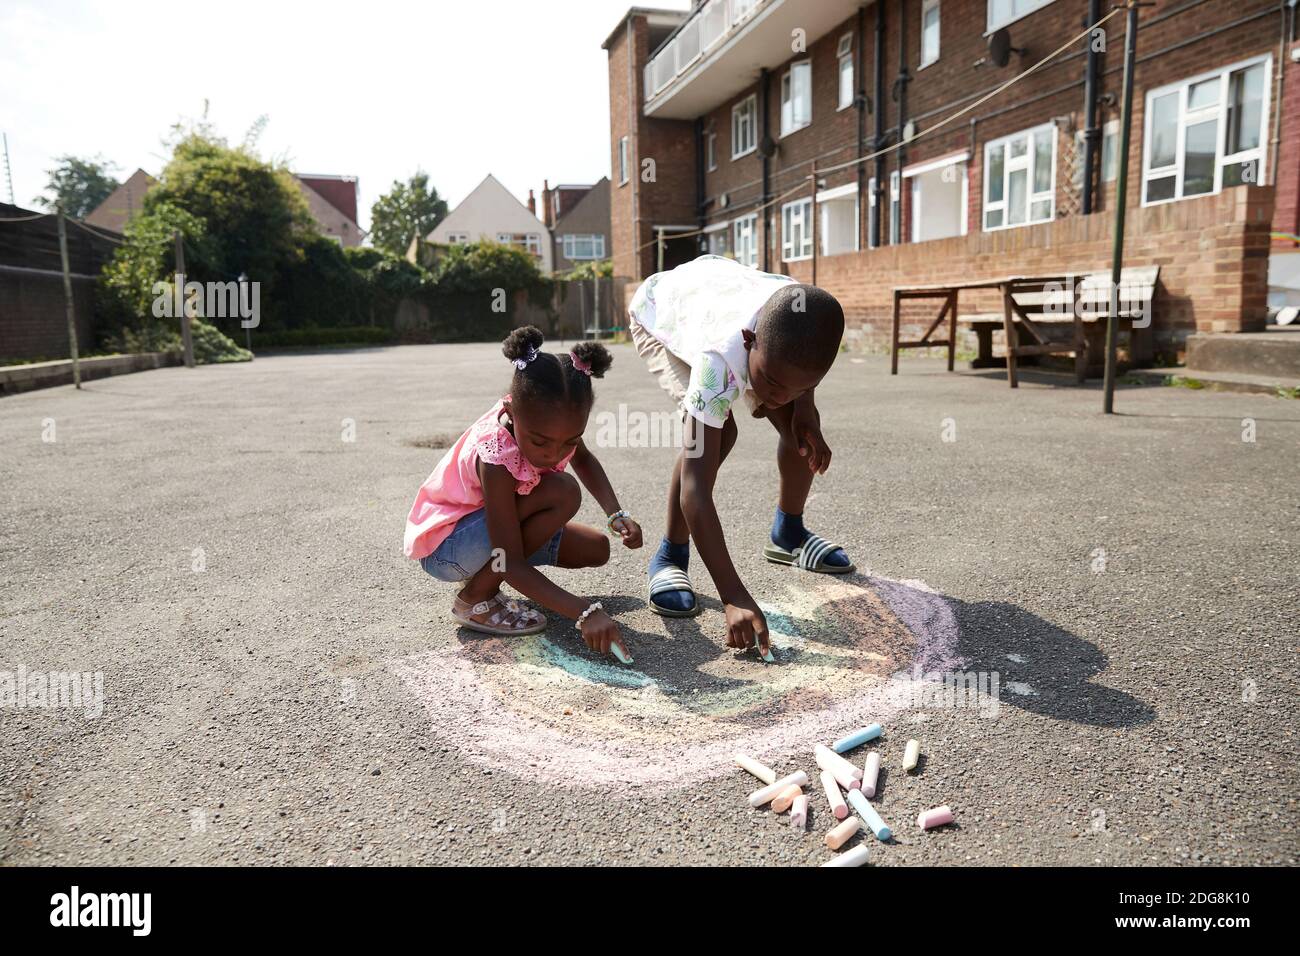 Brother and sister drawing rainbow with sidewalk chalk on pavement Stock Photo